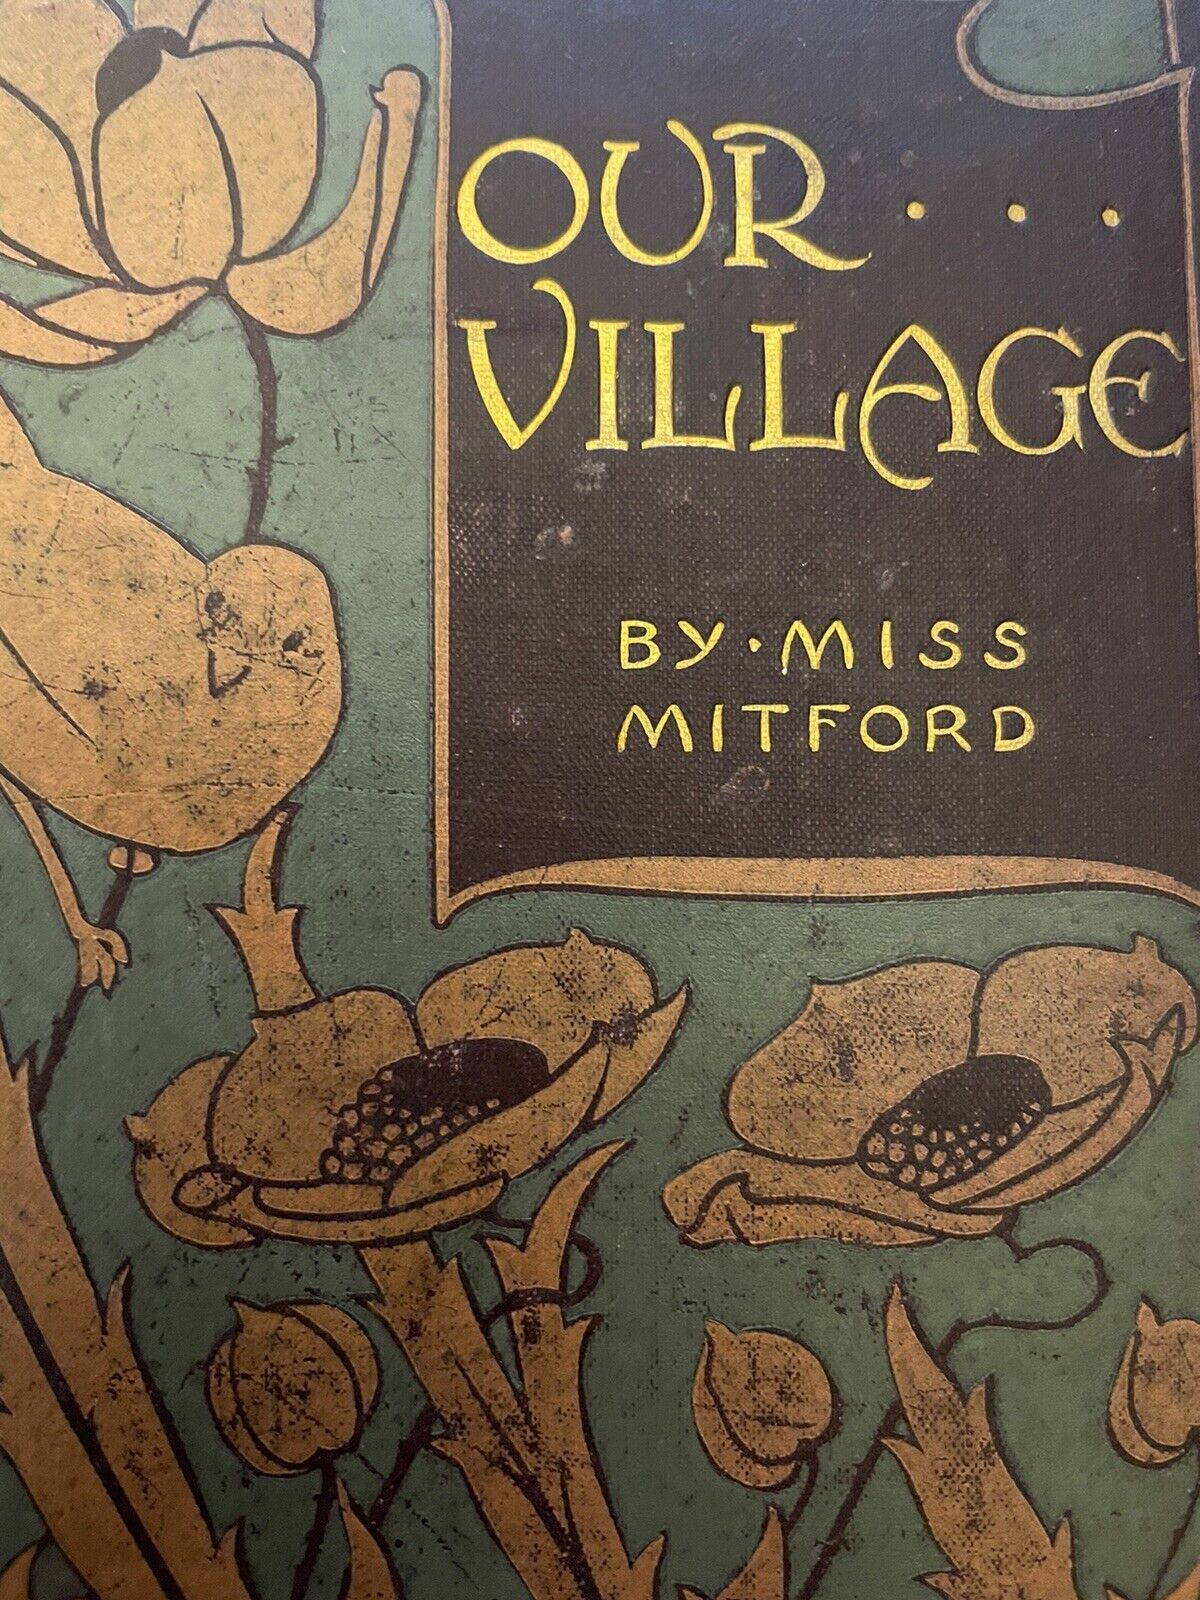 Our Village : Miss Mitford : Talwin Morris : Arts &amp; Crafts Binding 1899